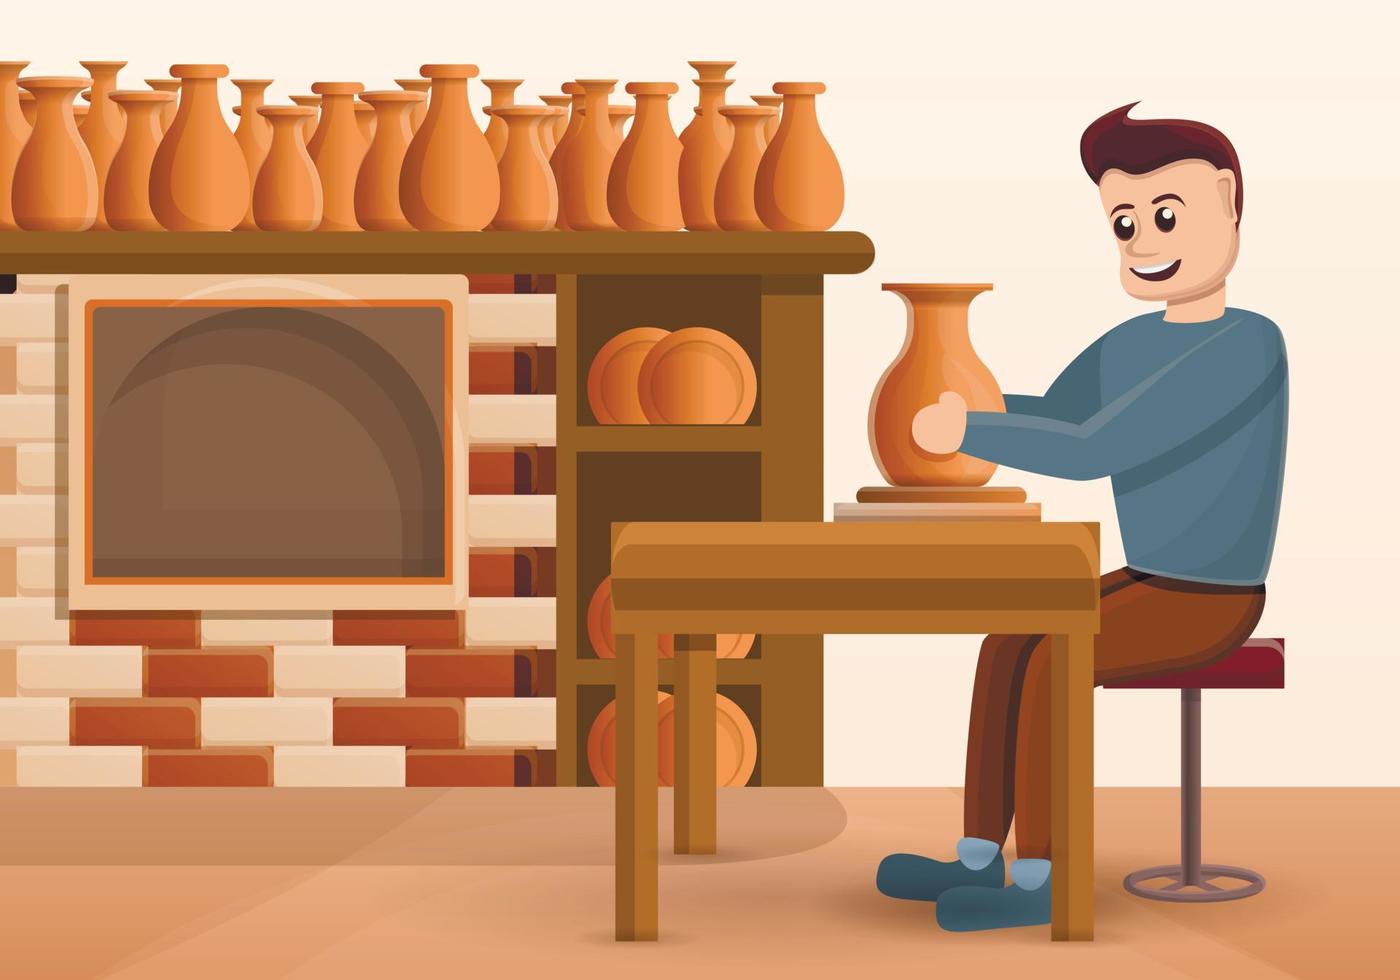 Potters wheel concept background, cartoon style vector